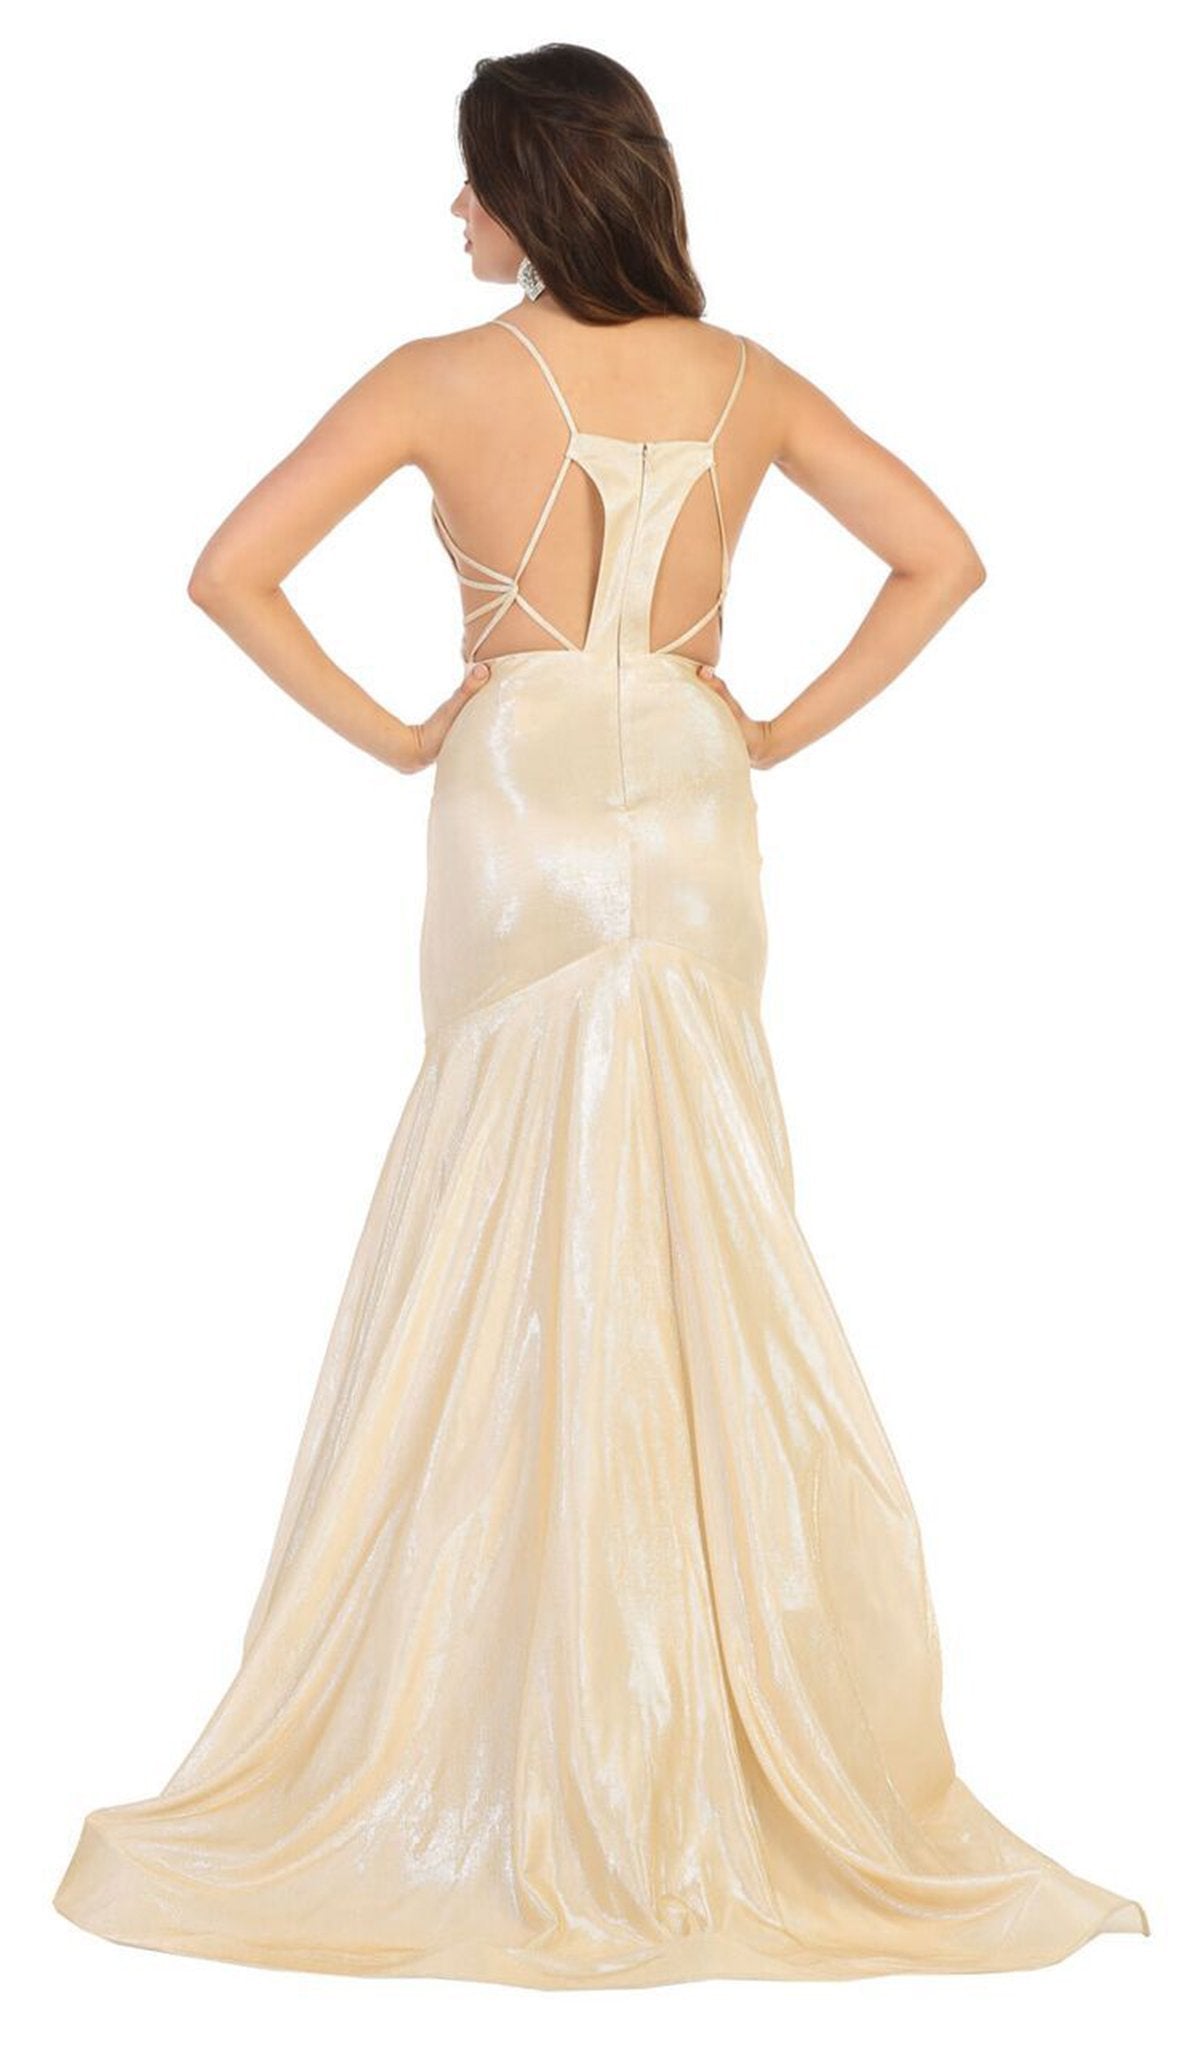 May Queen - RQ7739 Strappy Plunging V-Neck Trumpet Dress In Nude